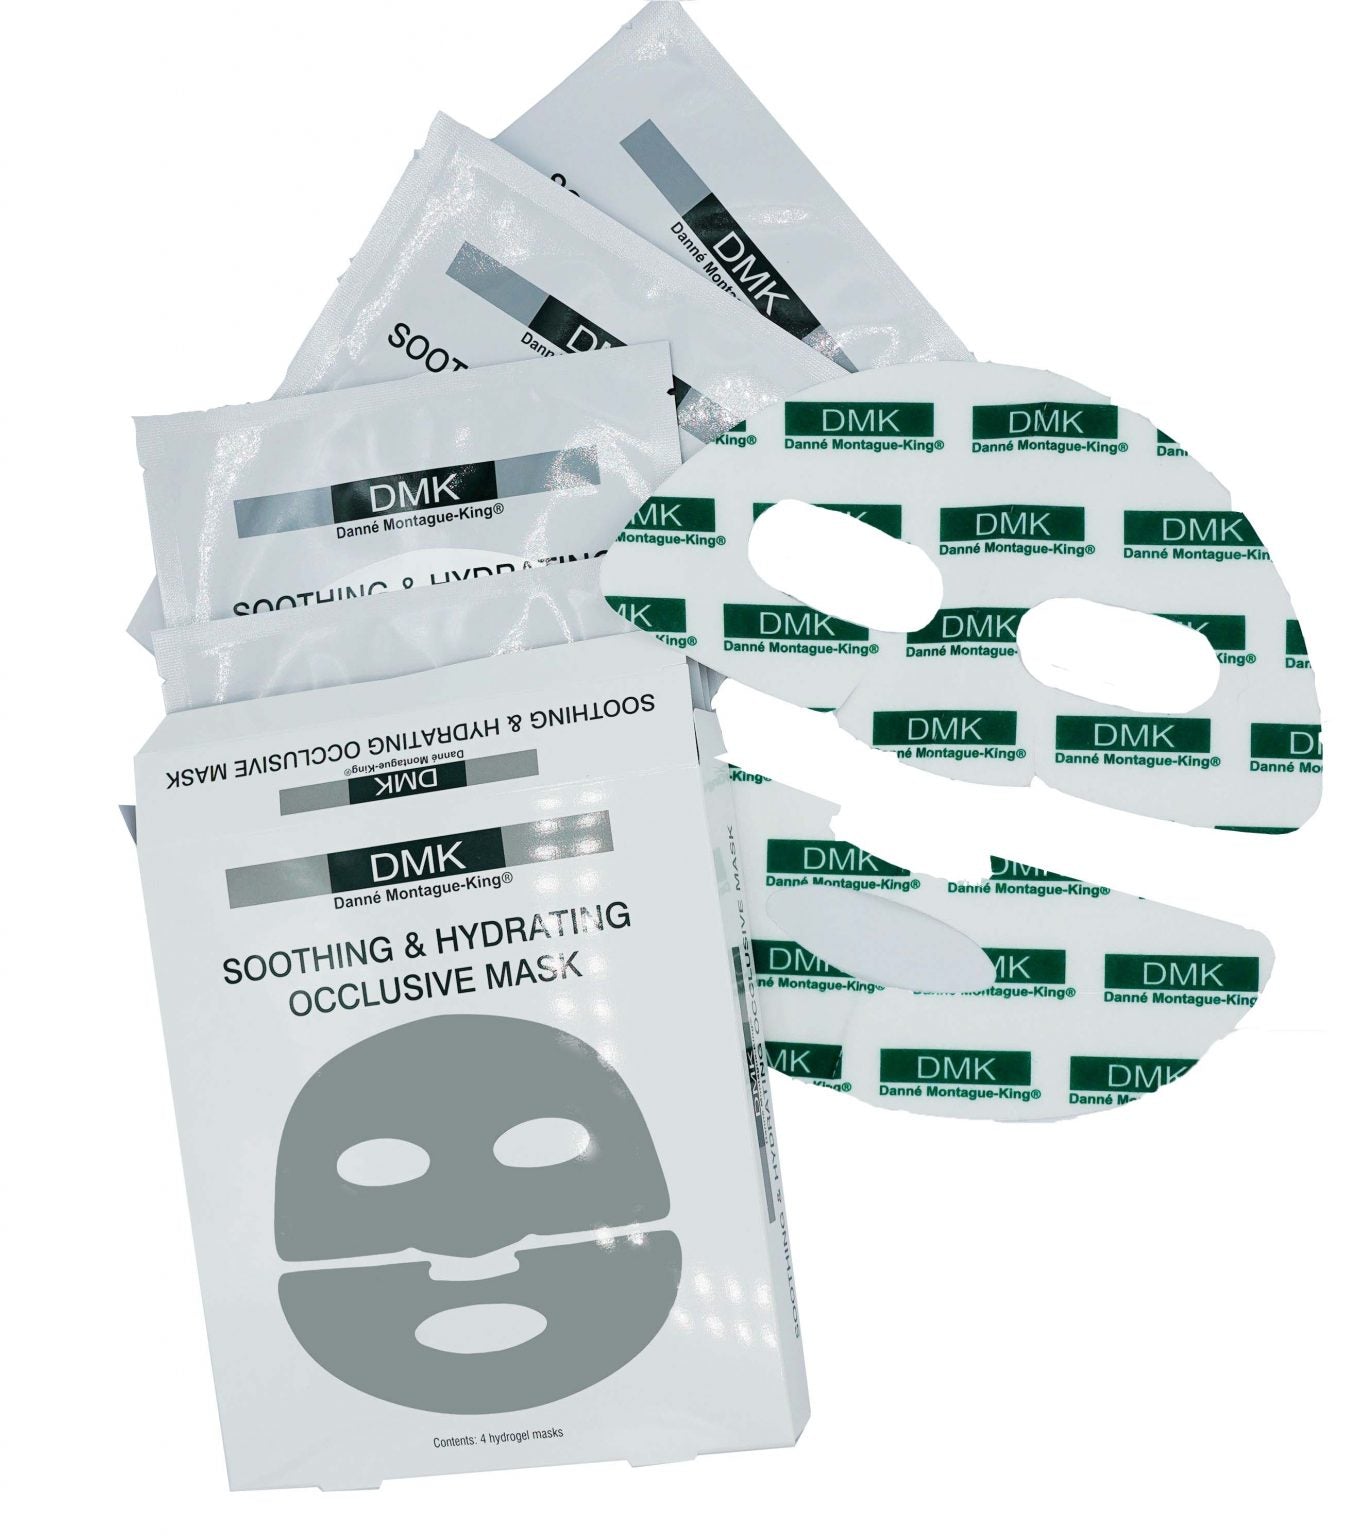 Soothing & Hydrating Occlusive Sheet Mask